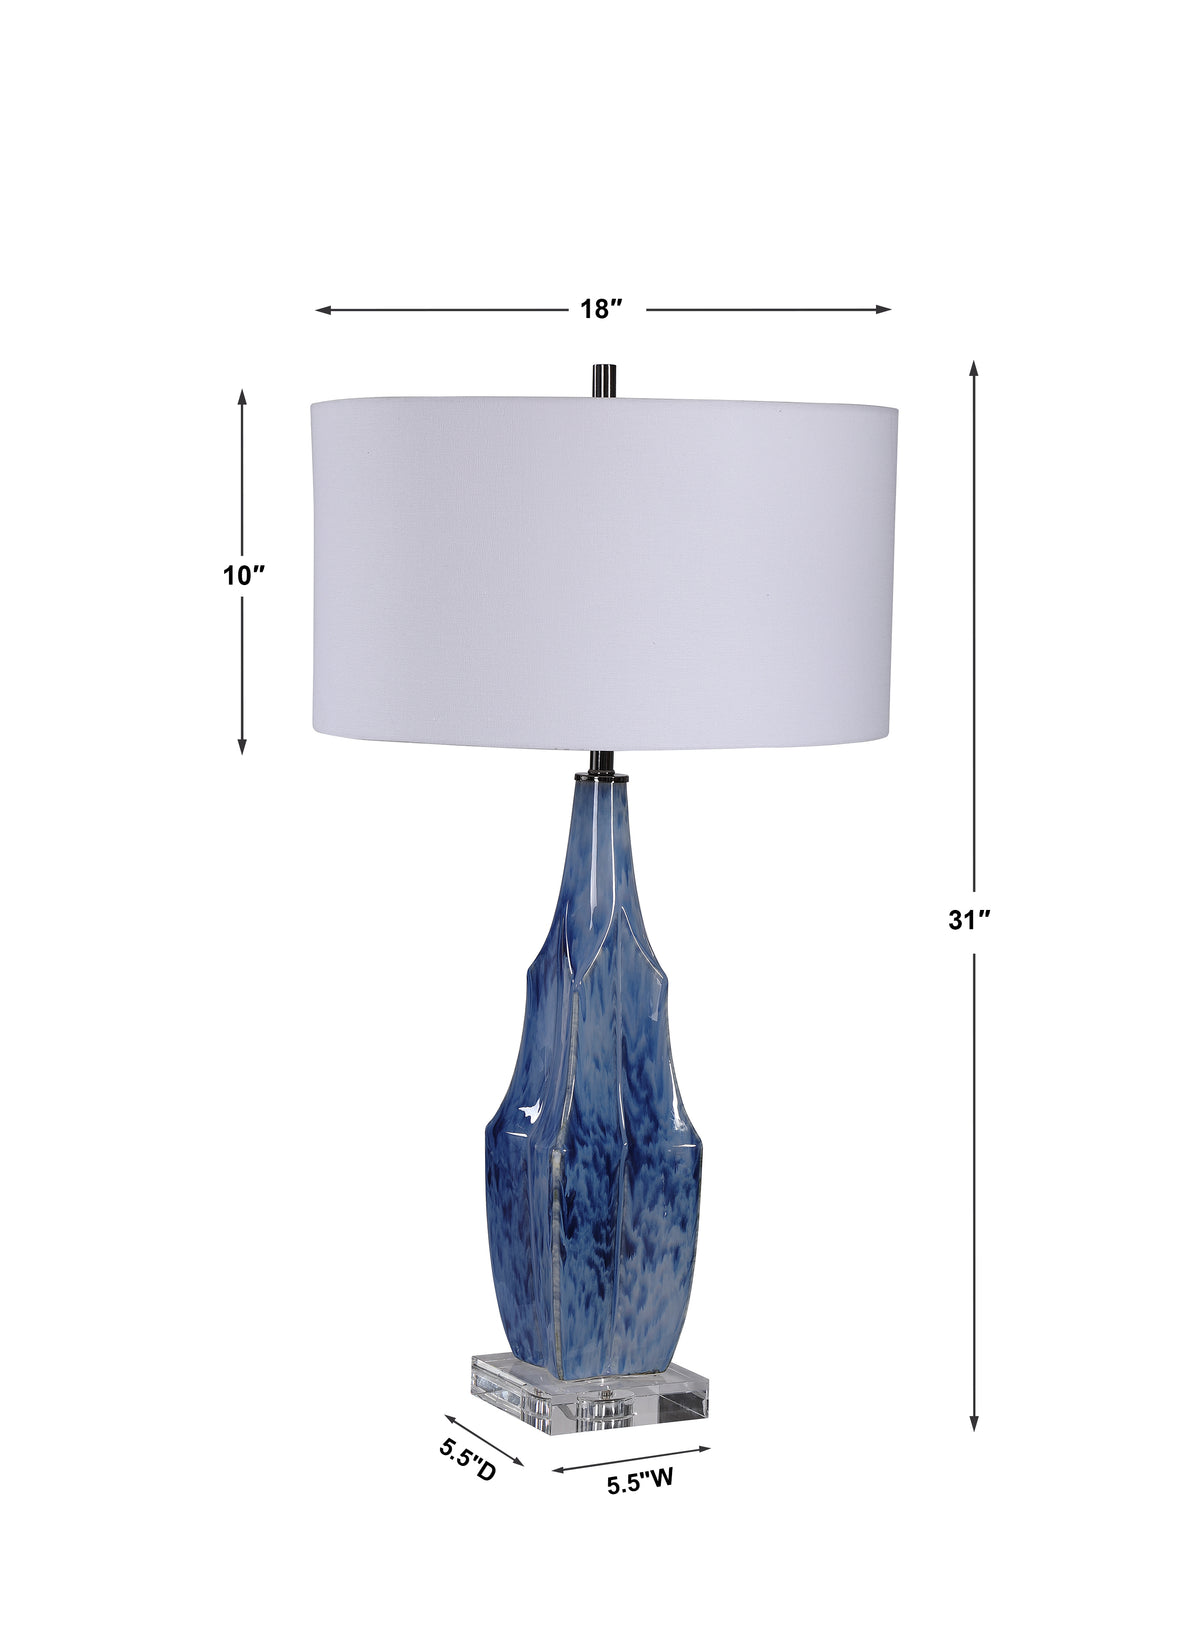 Uttermost Everard Blue Table Lamp